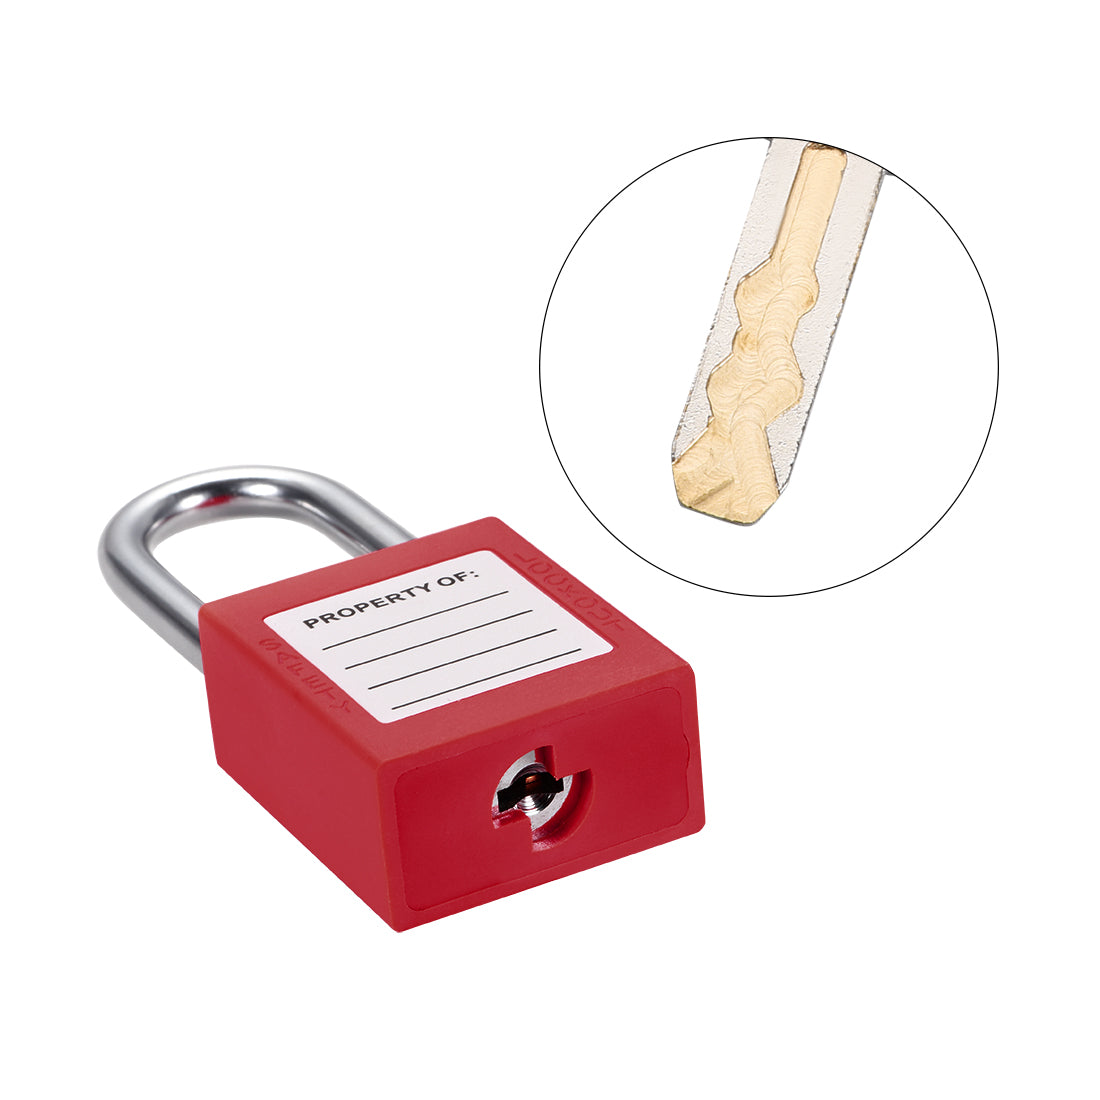 uxcell Uxcell Lockout Tagout Safety Padlock 38mm Steel Shackle Keyed Alike Red